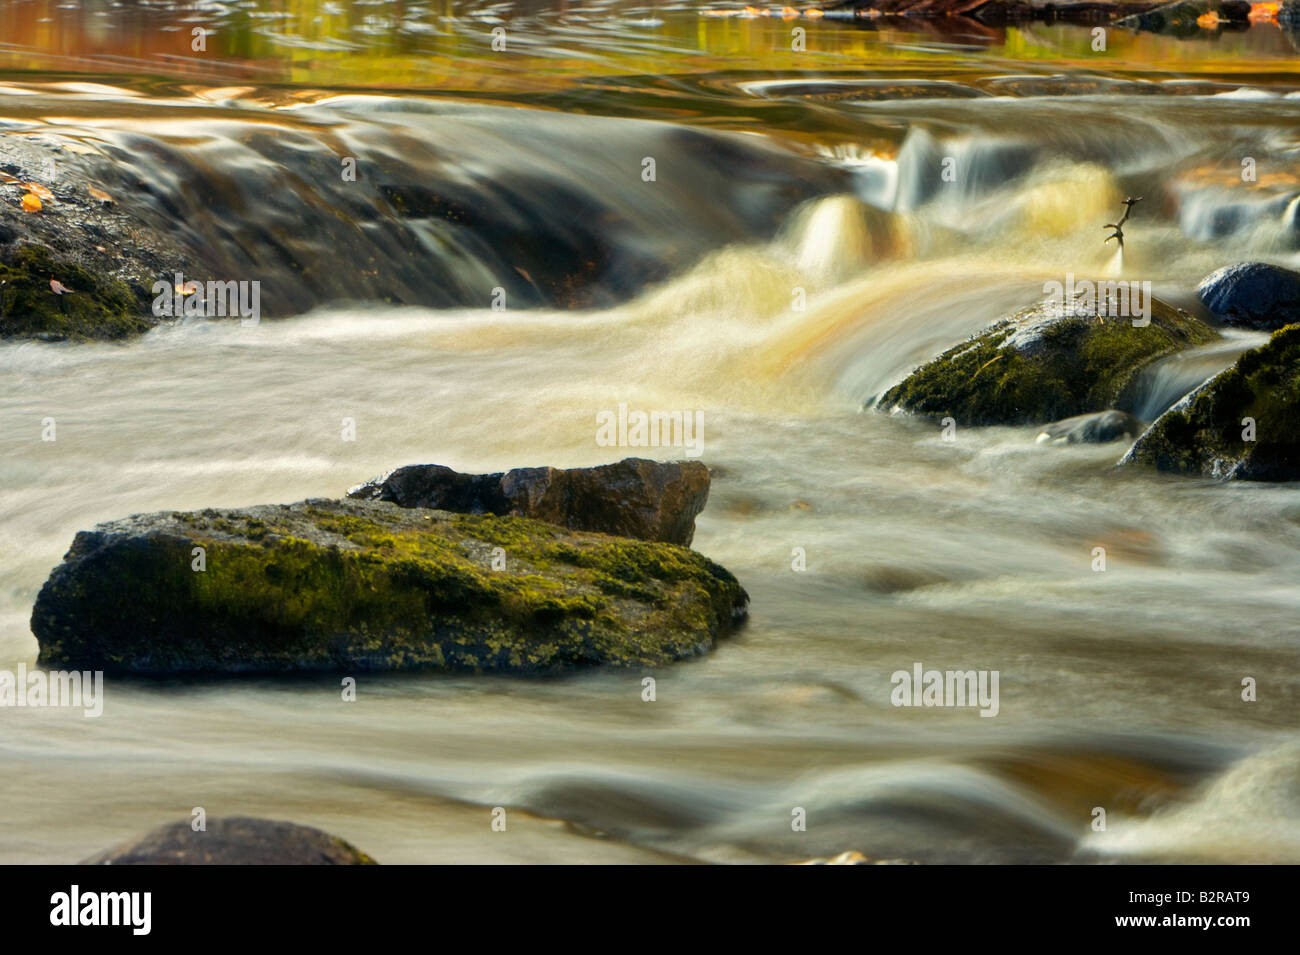 West Fork Montreal River Iron County, Wisconsin USA Stockfoto